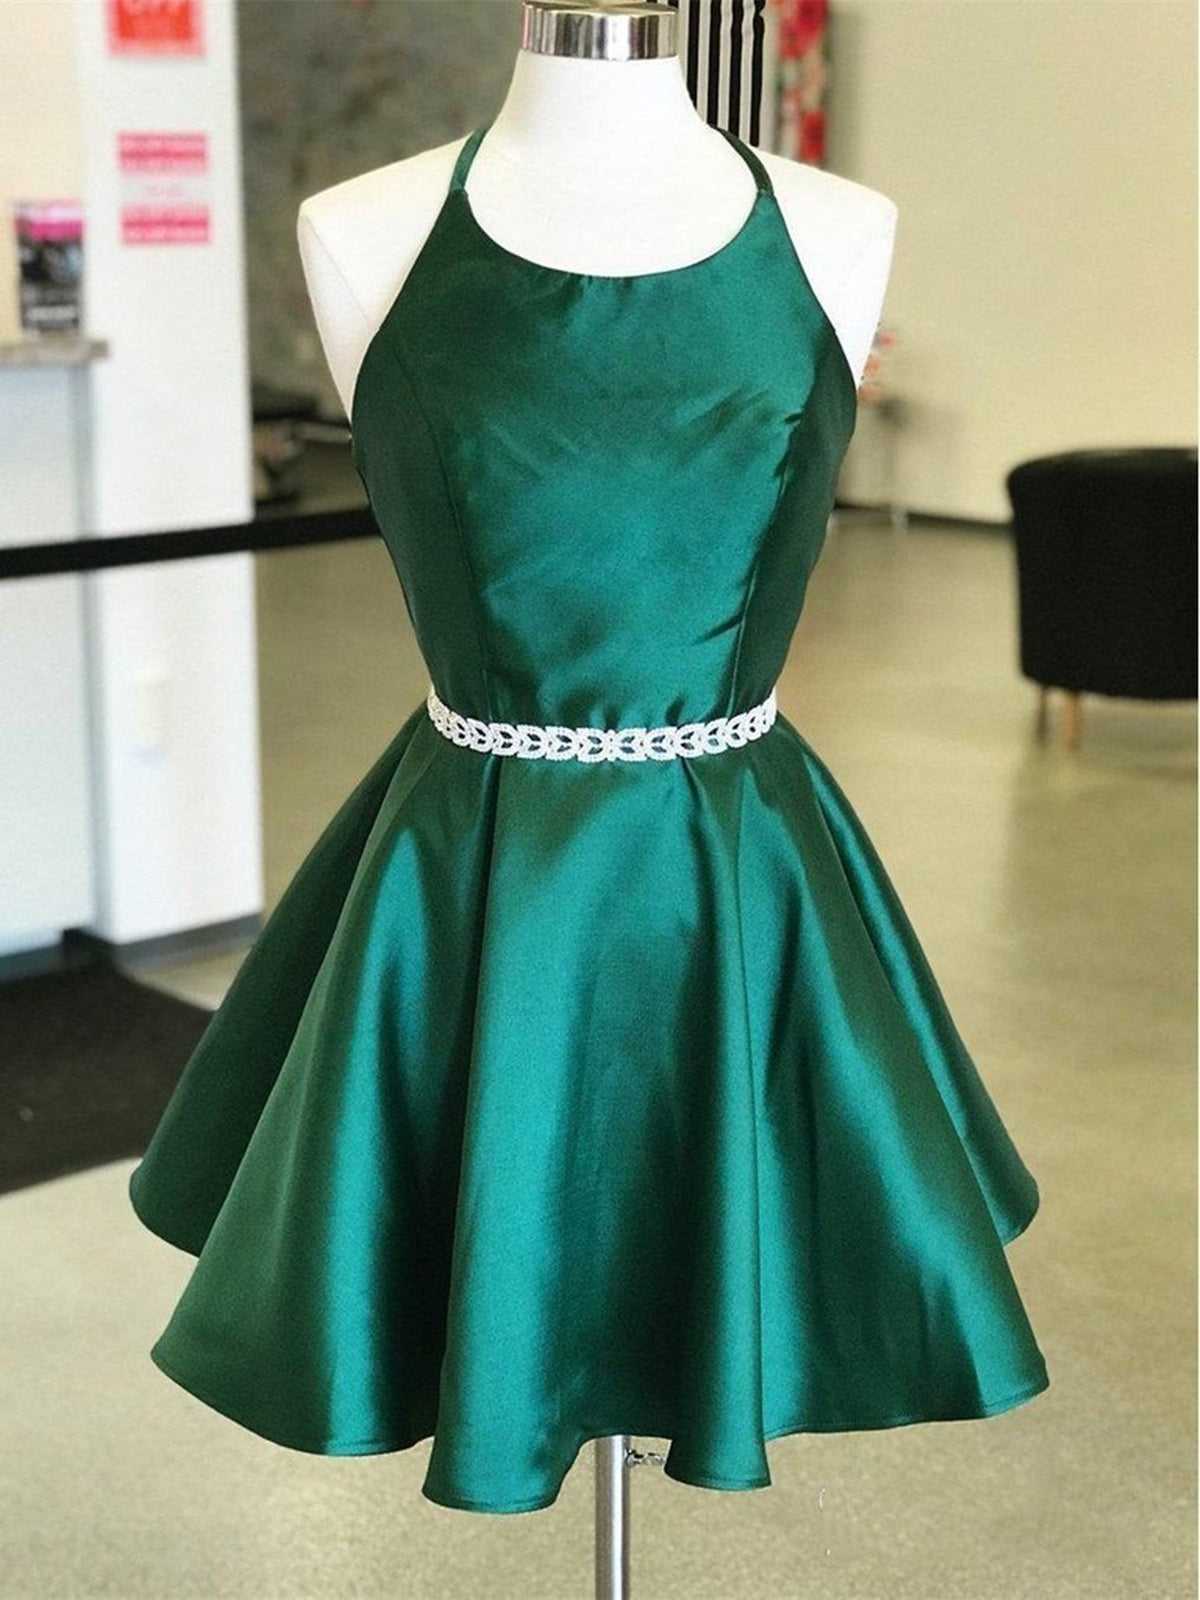 Backless Dark Green Short Corset Prom Dresses, Short Dark Green Corset Formal Corset Homecoming Dresses outfit, Formal Dress Trends